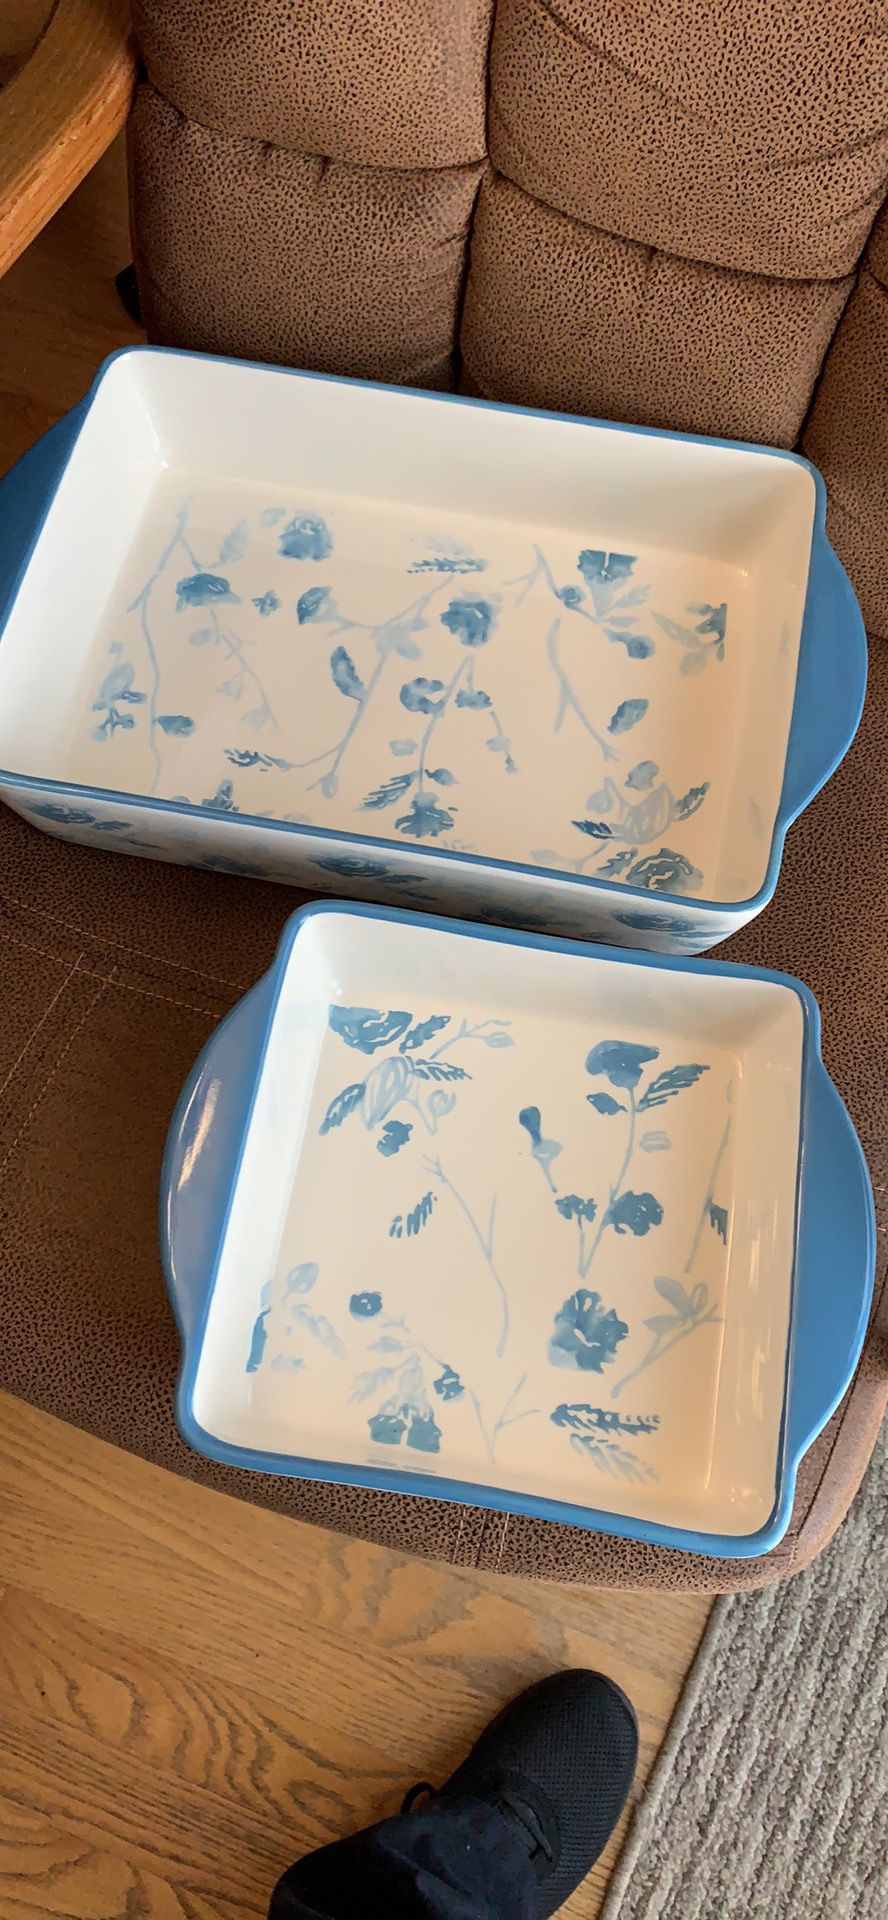 New set of 2 ceramic Bakeware dishes